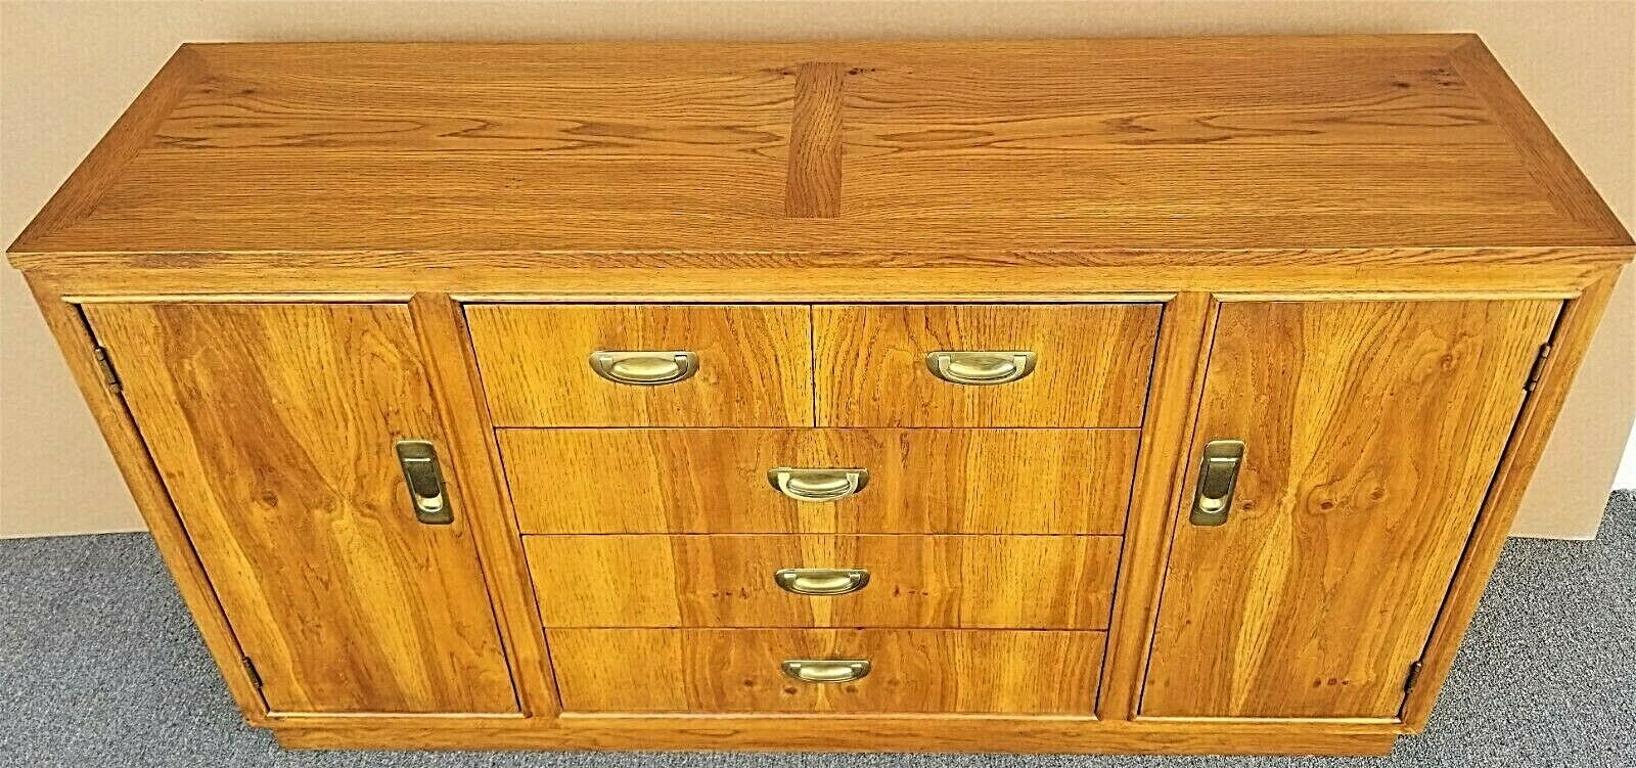 Offering One Of Our Recent Palm Beach Estate Fine Furniture Acquisitions Of A 
Mid Century Modern Campaign Style Buffet Sideboard Dry Bar
Featuring 3 drawers with dovetail construction, 2 side cabinets with adjustable shelves and solid brass